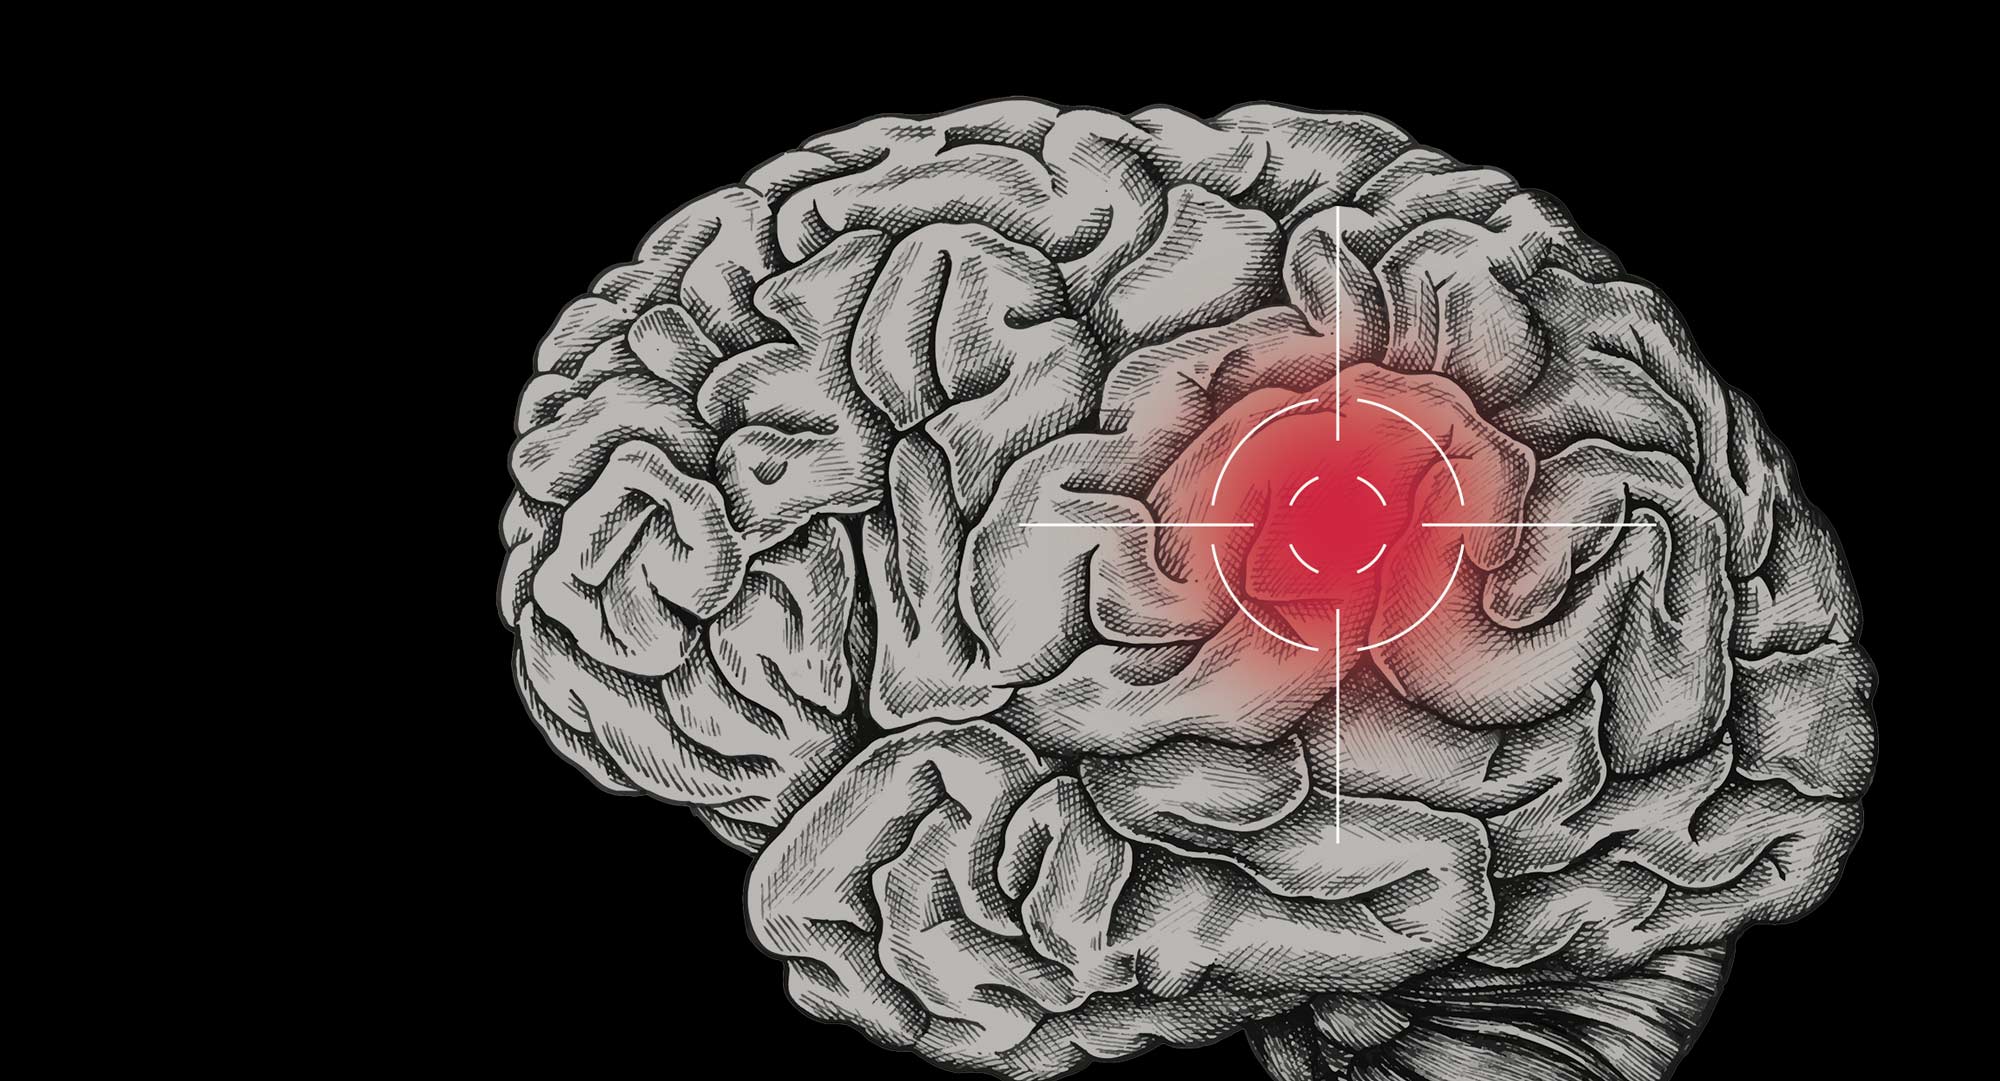 An illlustration of a brain with targeted red spot on it.